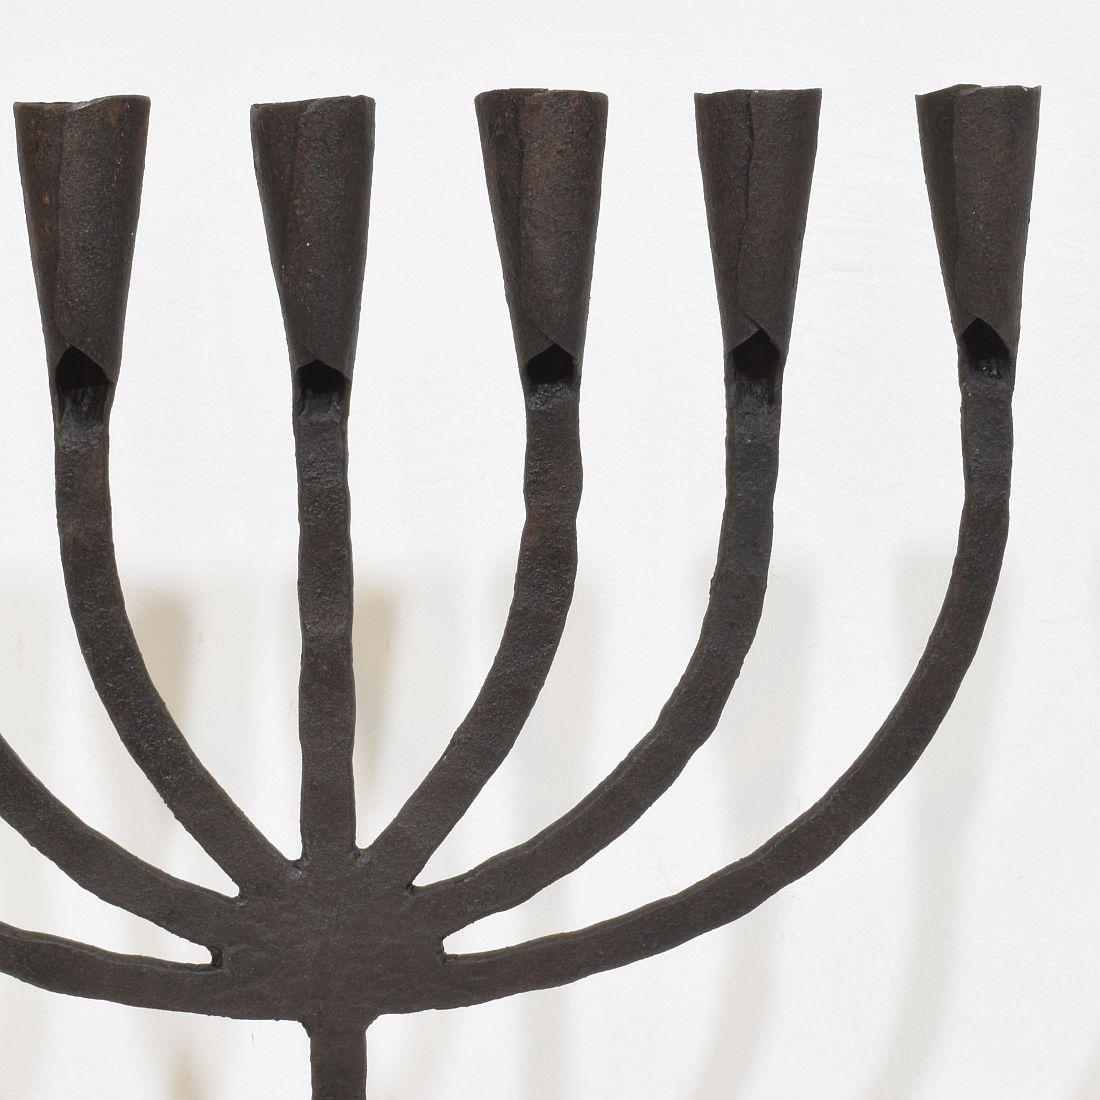 18th-19th Century Hand Forged Iron Candleholder For Sale 3